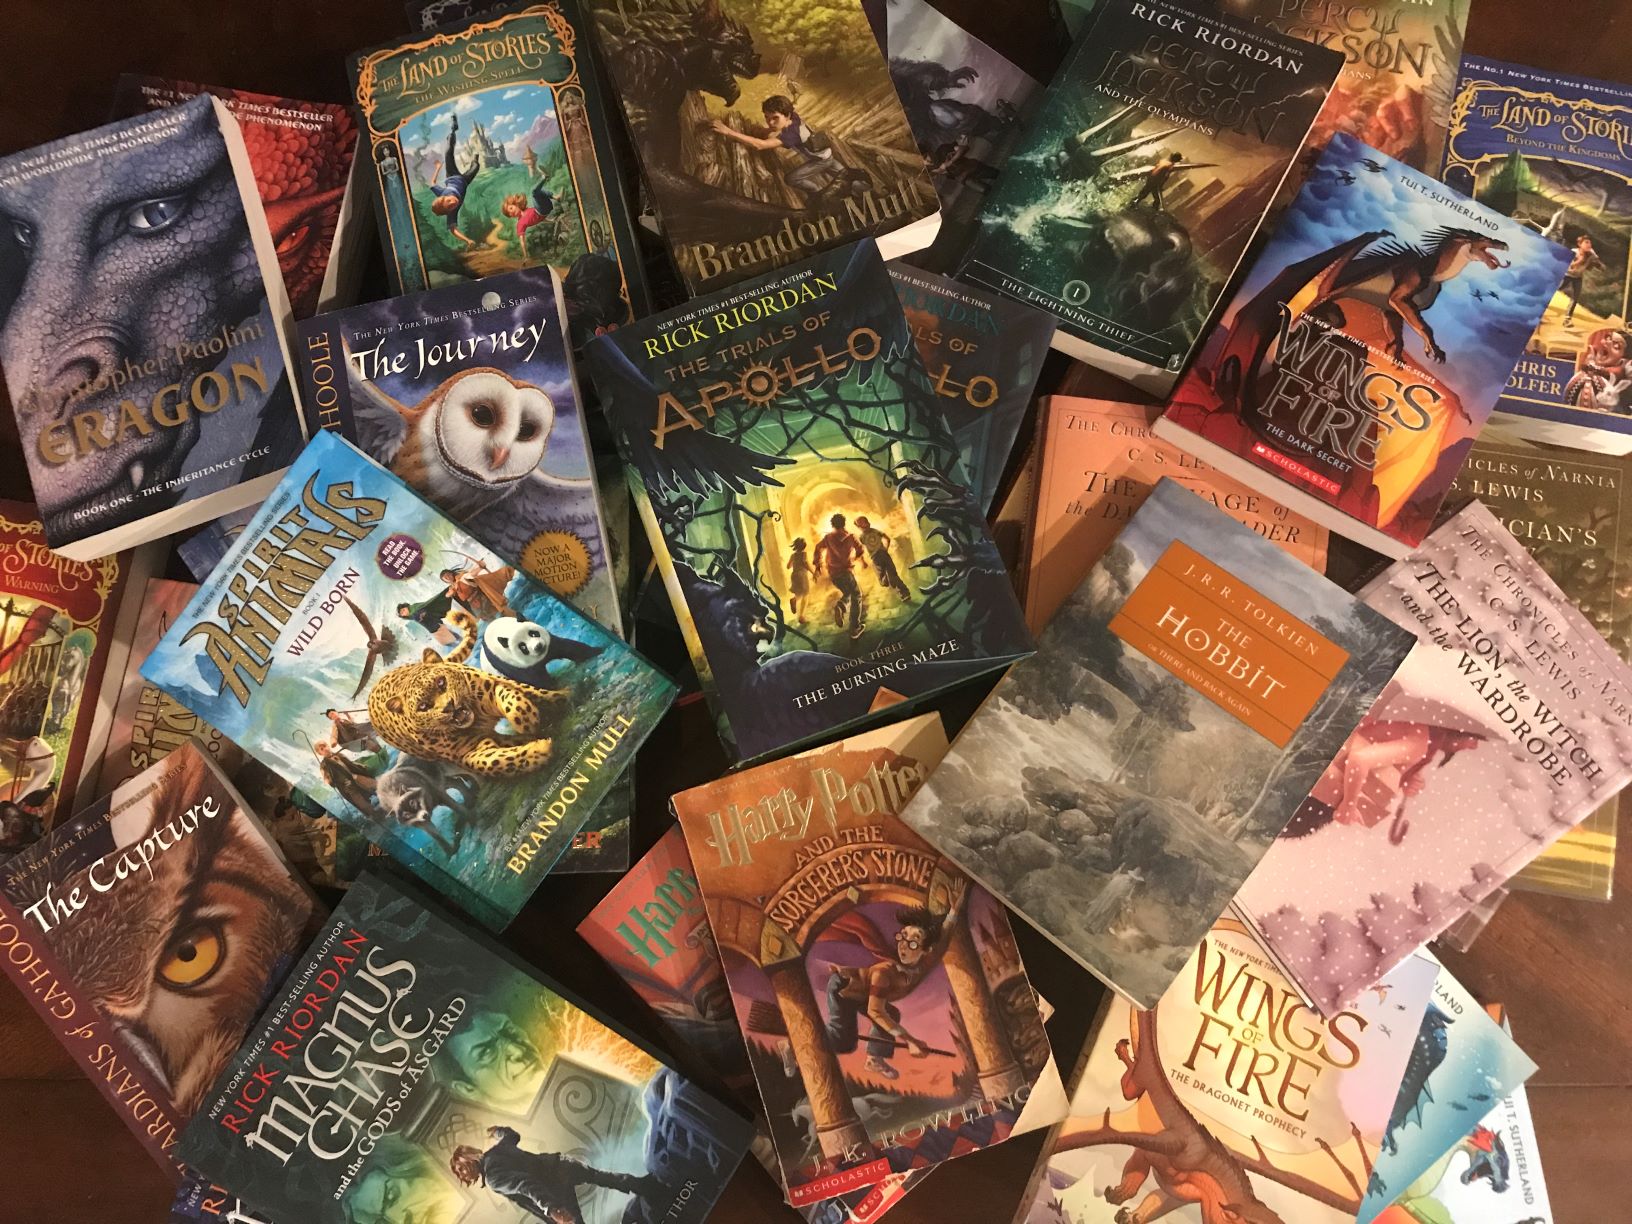 25 incredible books for kids ages 8-12 {summer reading list